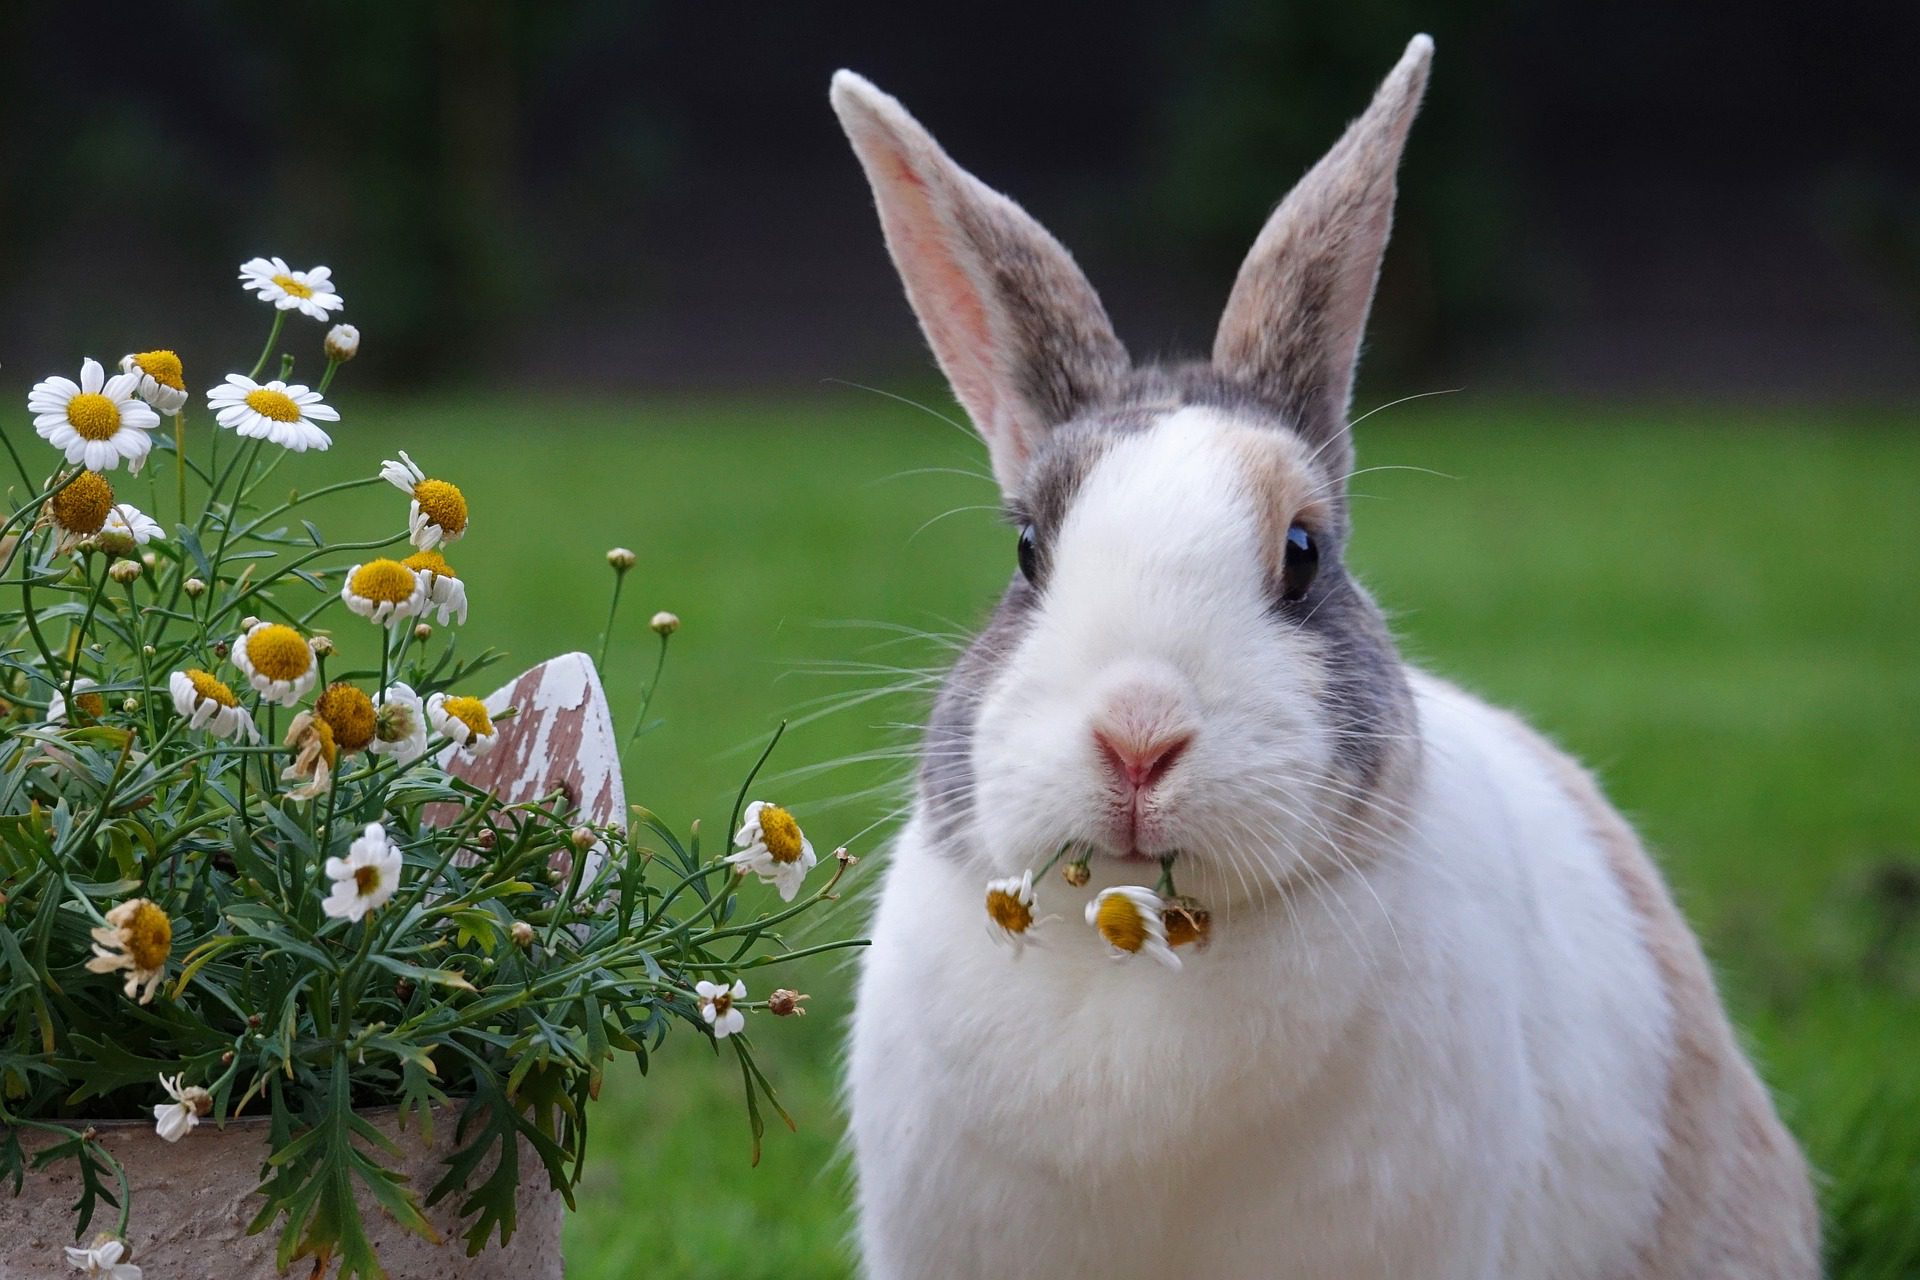 Common Types of Feed for Rabbits